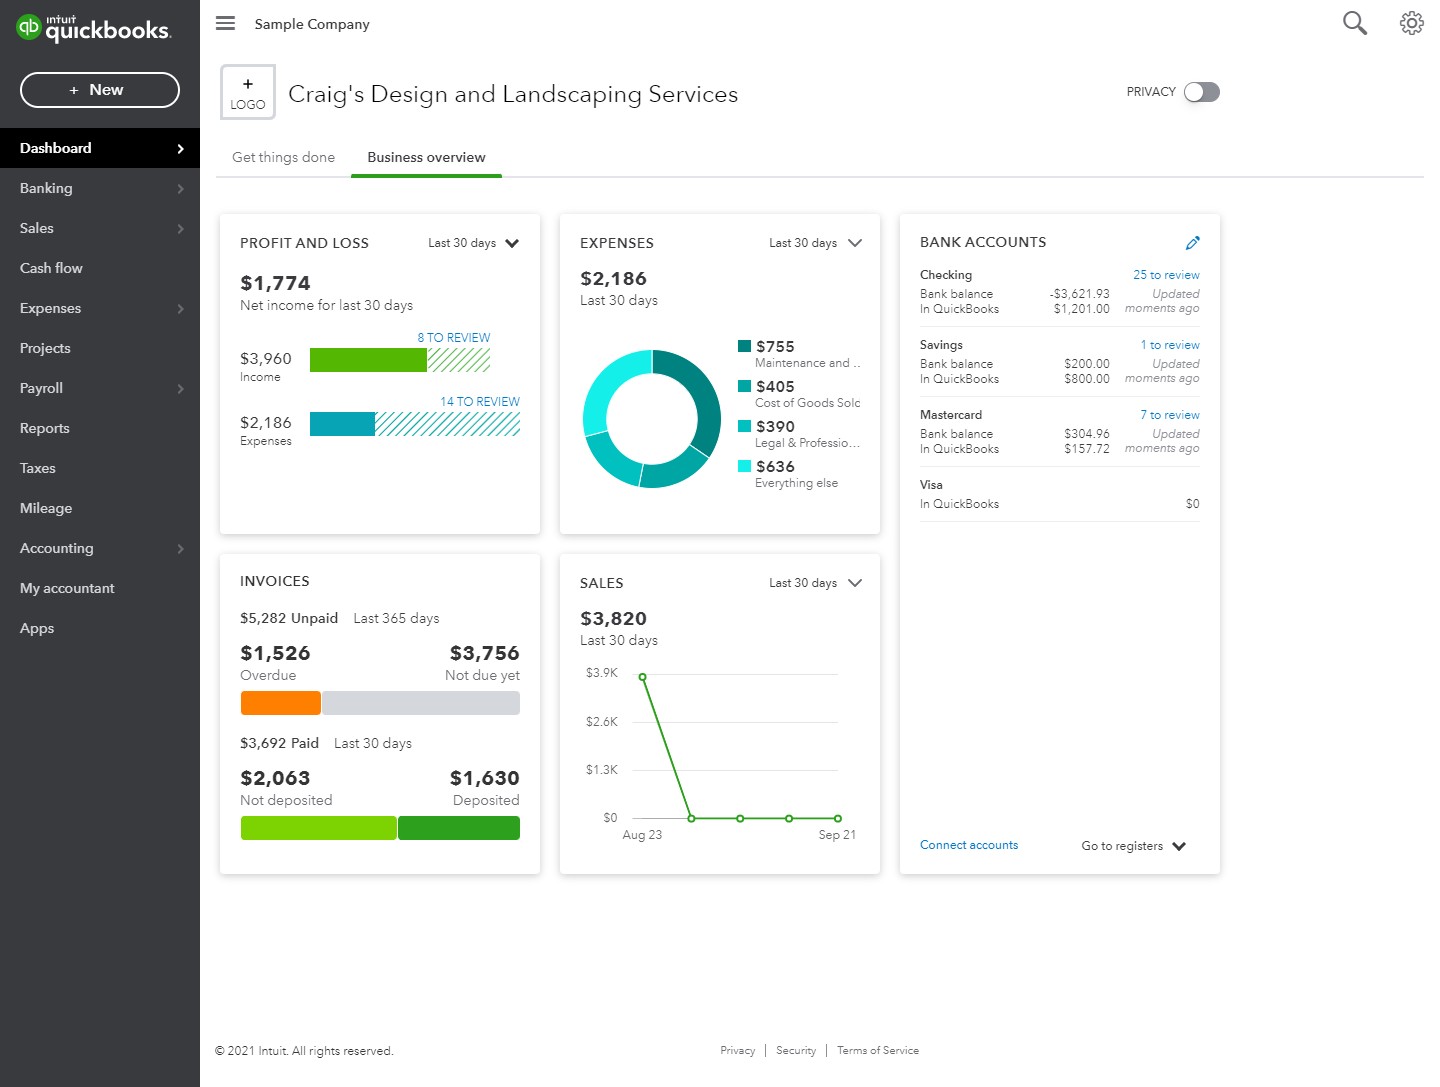 A snapshot of the QuickBooks Online dashboard.